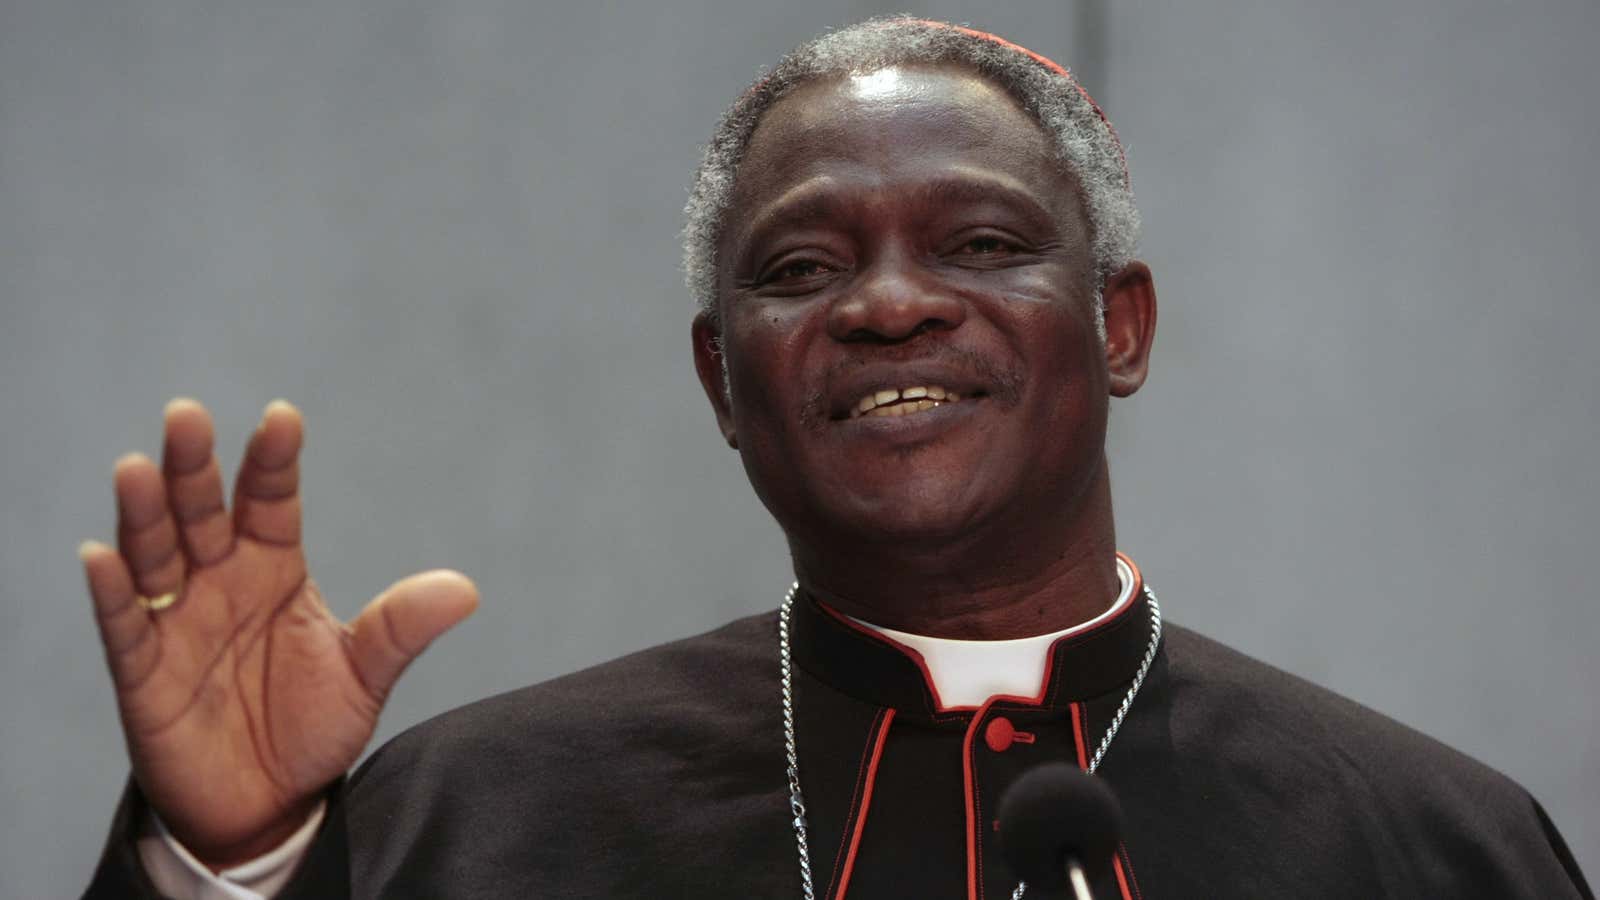 Ghanaian Cardinal Peter Kodwo Appiah Turkson is considered among the favorites to be the next pope.